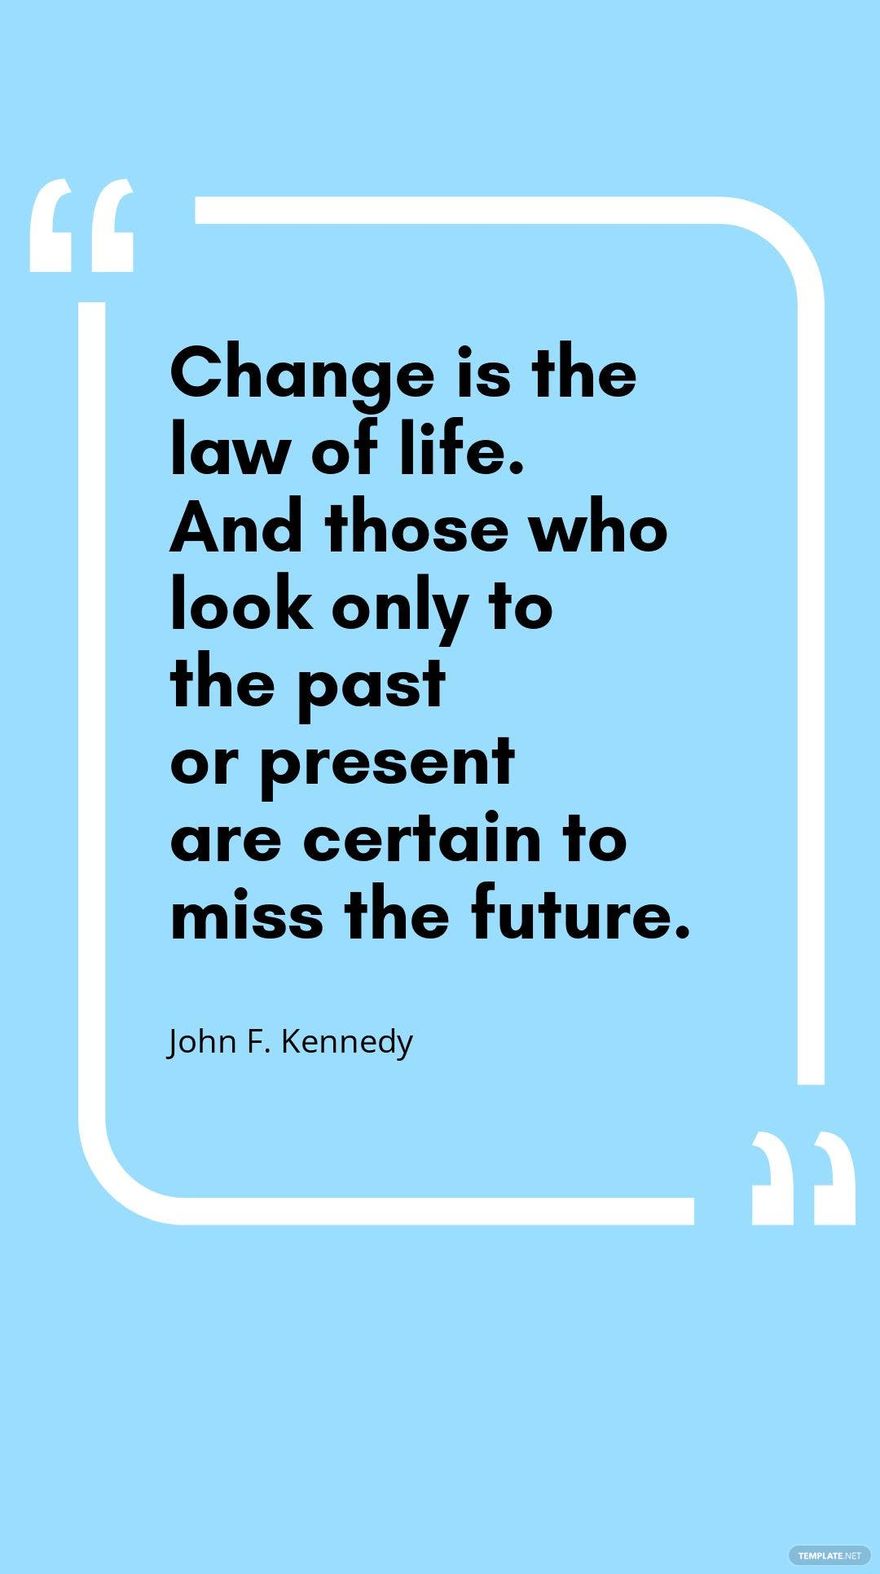 John F. Kennedy - Change is the law of life. And those who look only to the past or present are certain to miss the future.